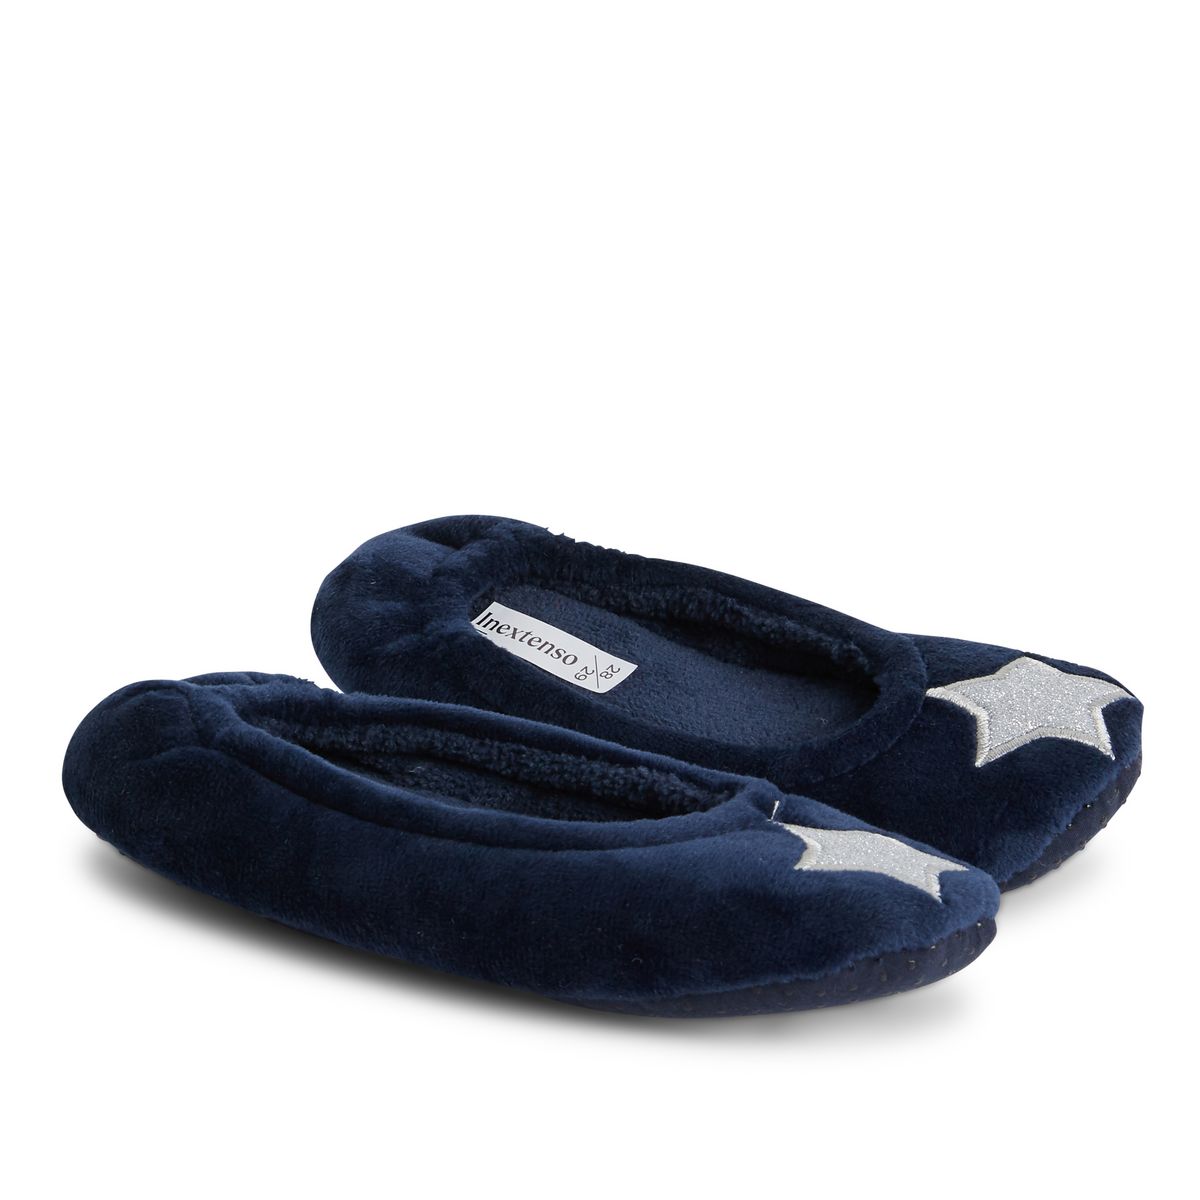 IN EXTENSO Chaussons ballerines fille